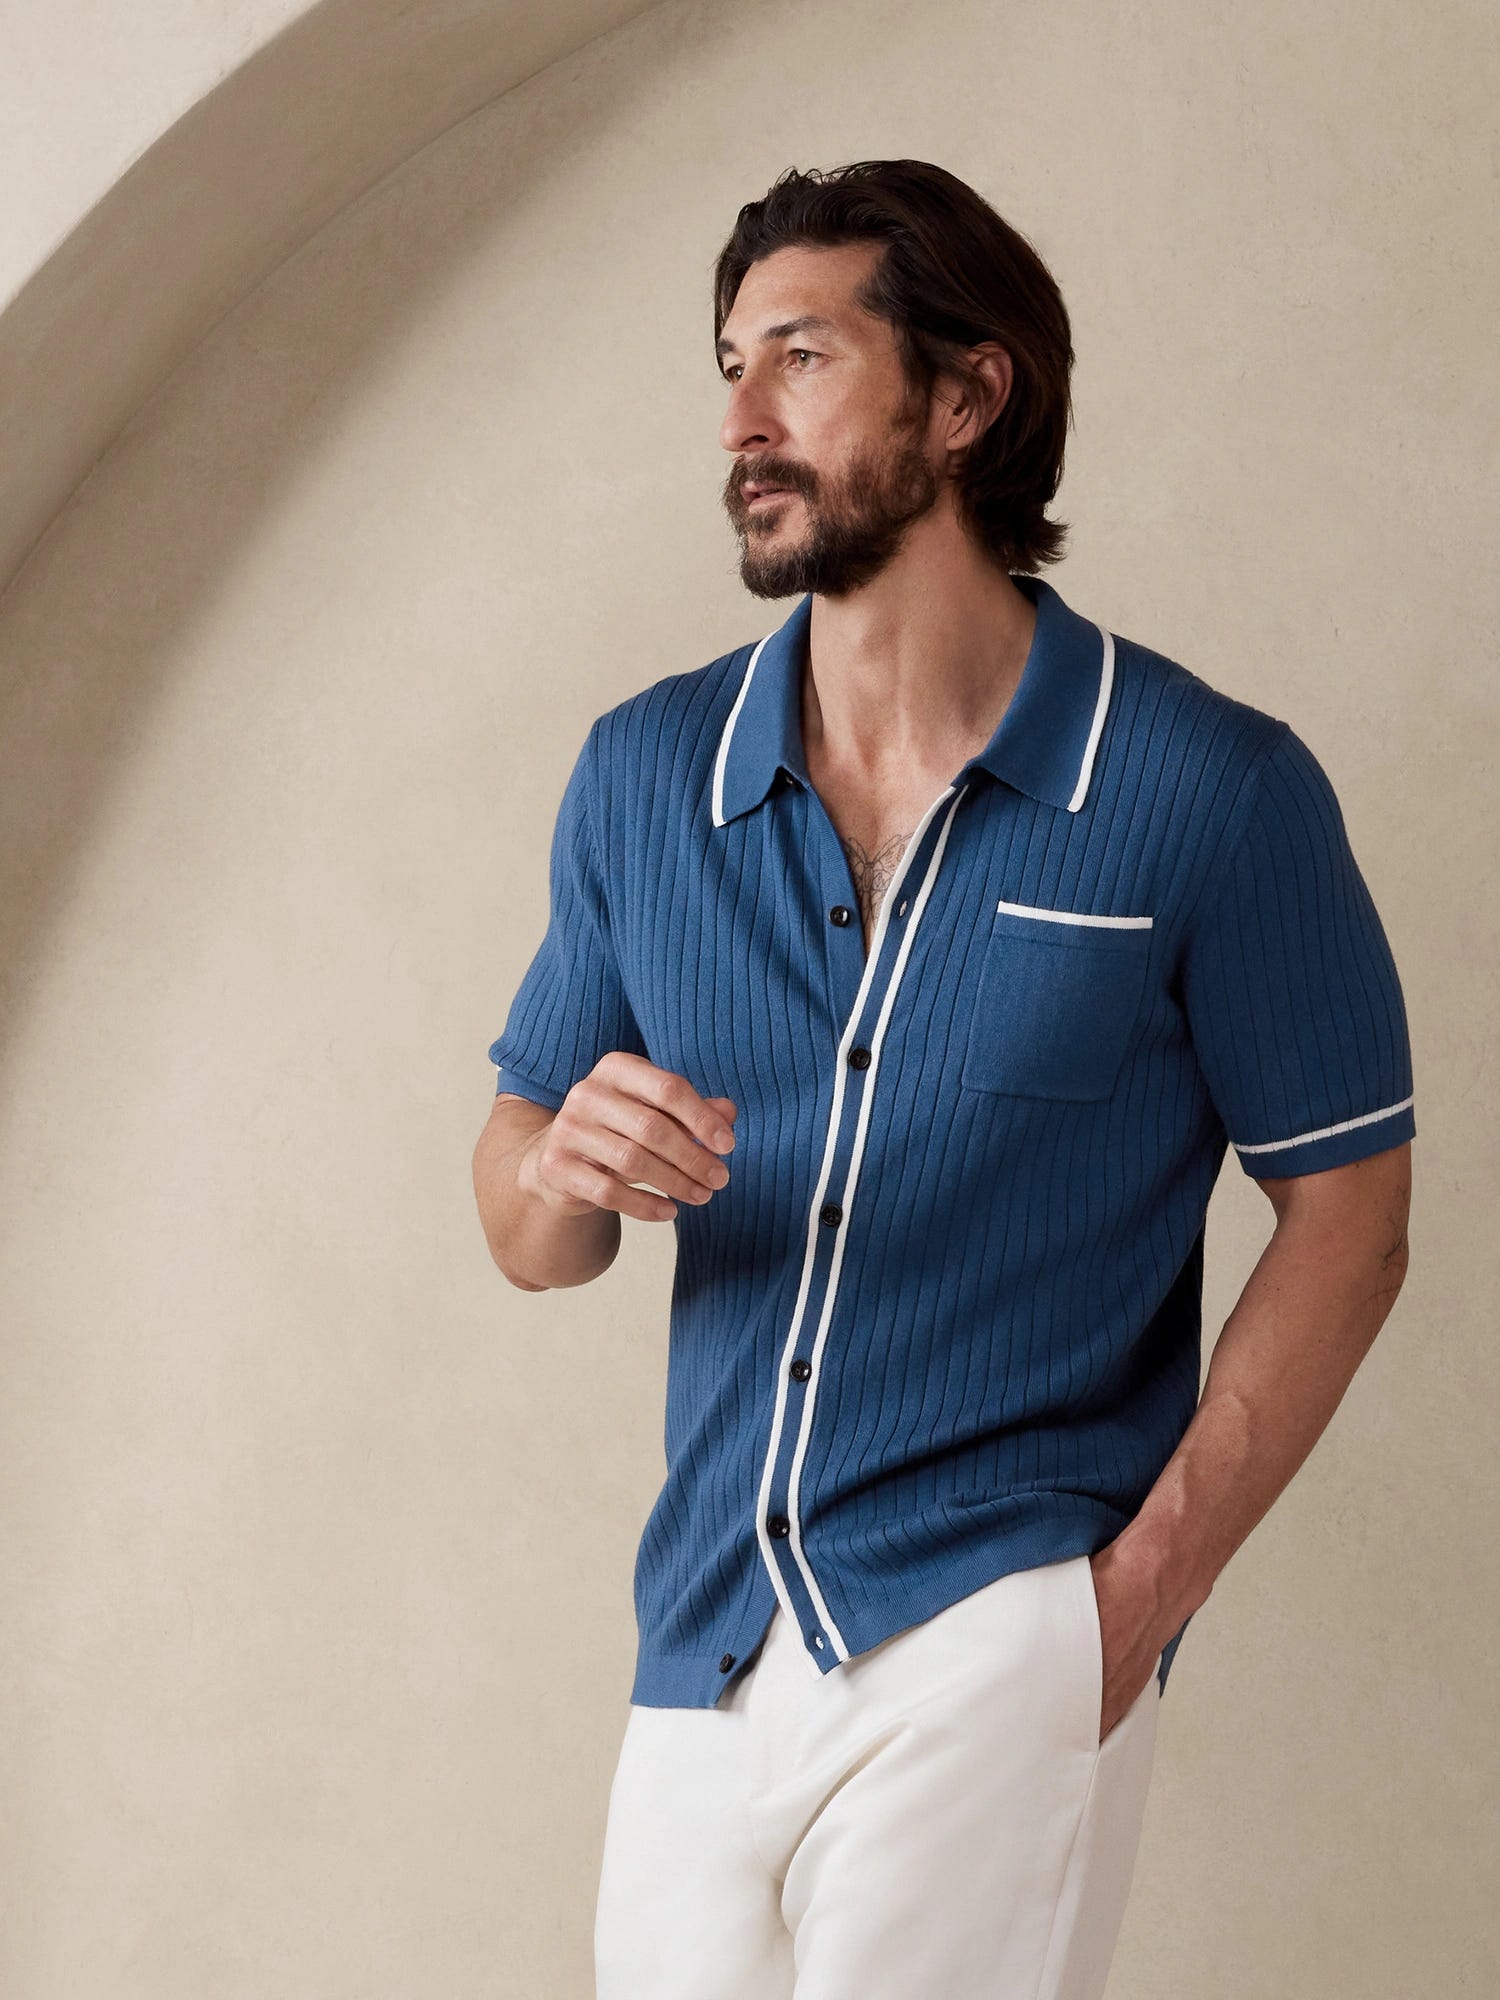 The Ultimate Summer Shopping Guide, Pt 1: The 40 Best Shirts to